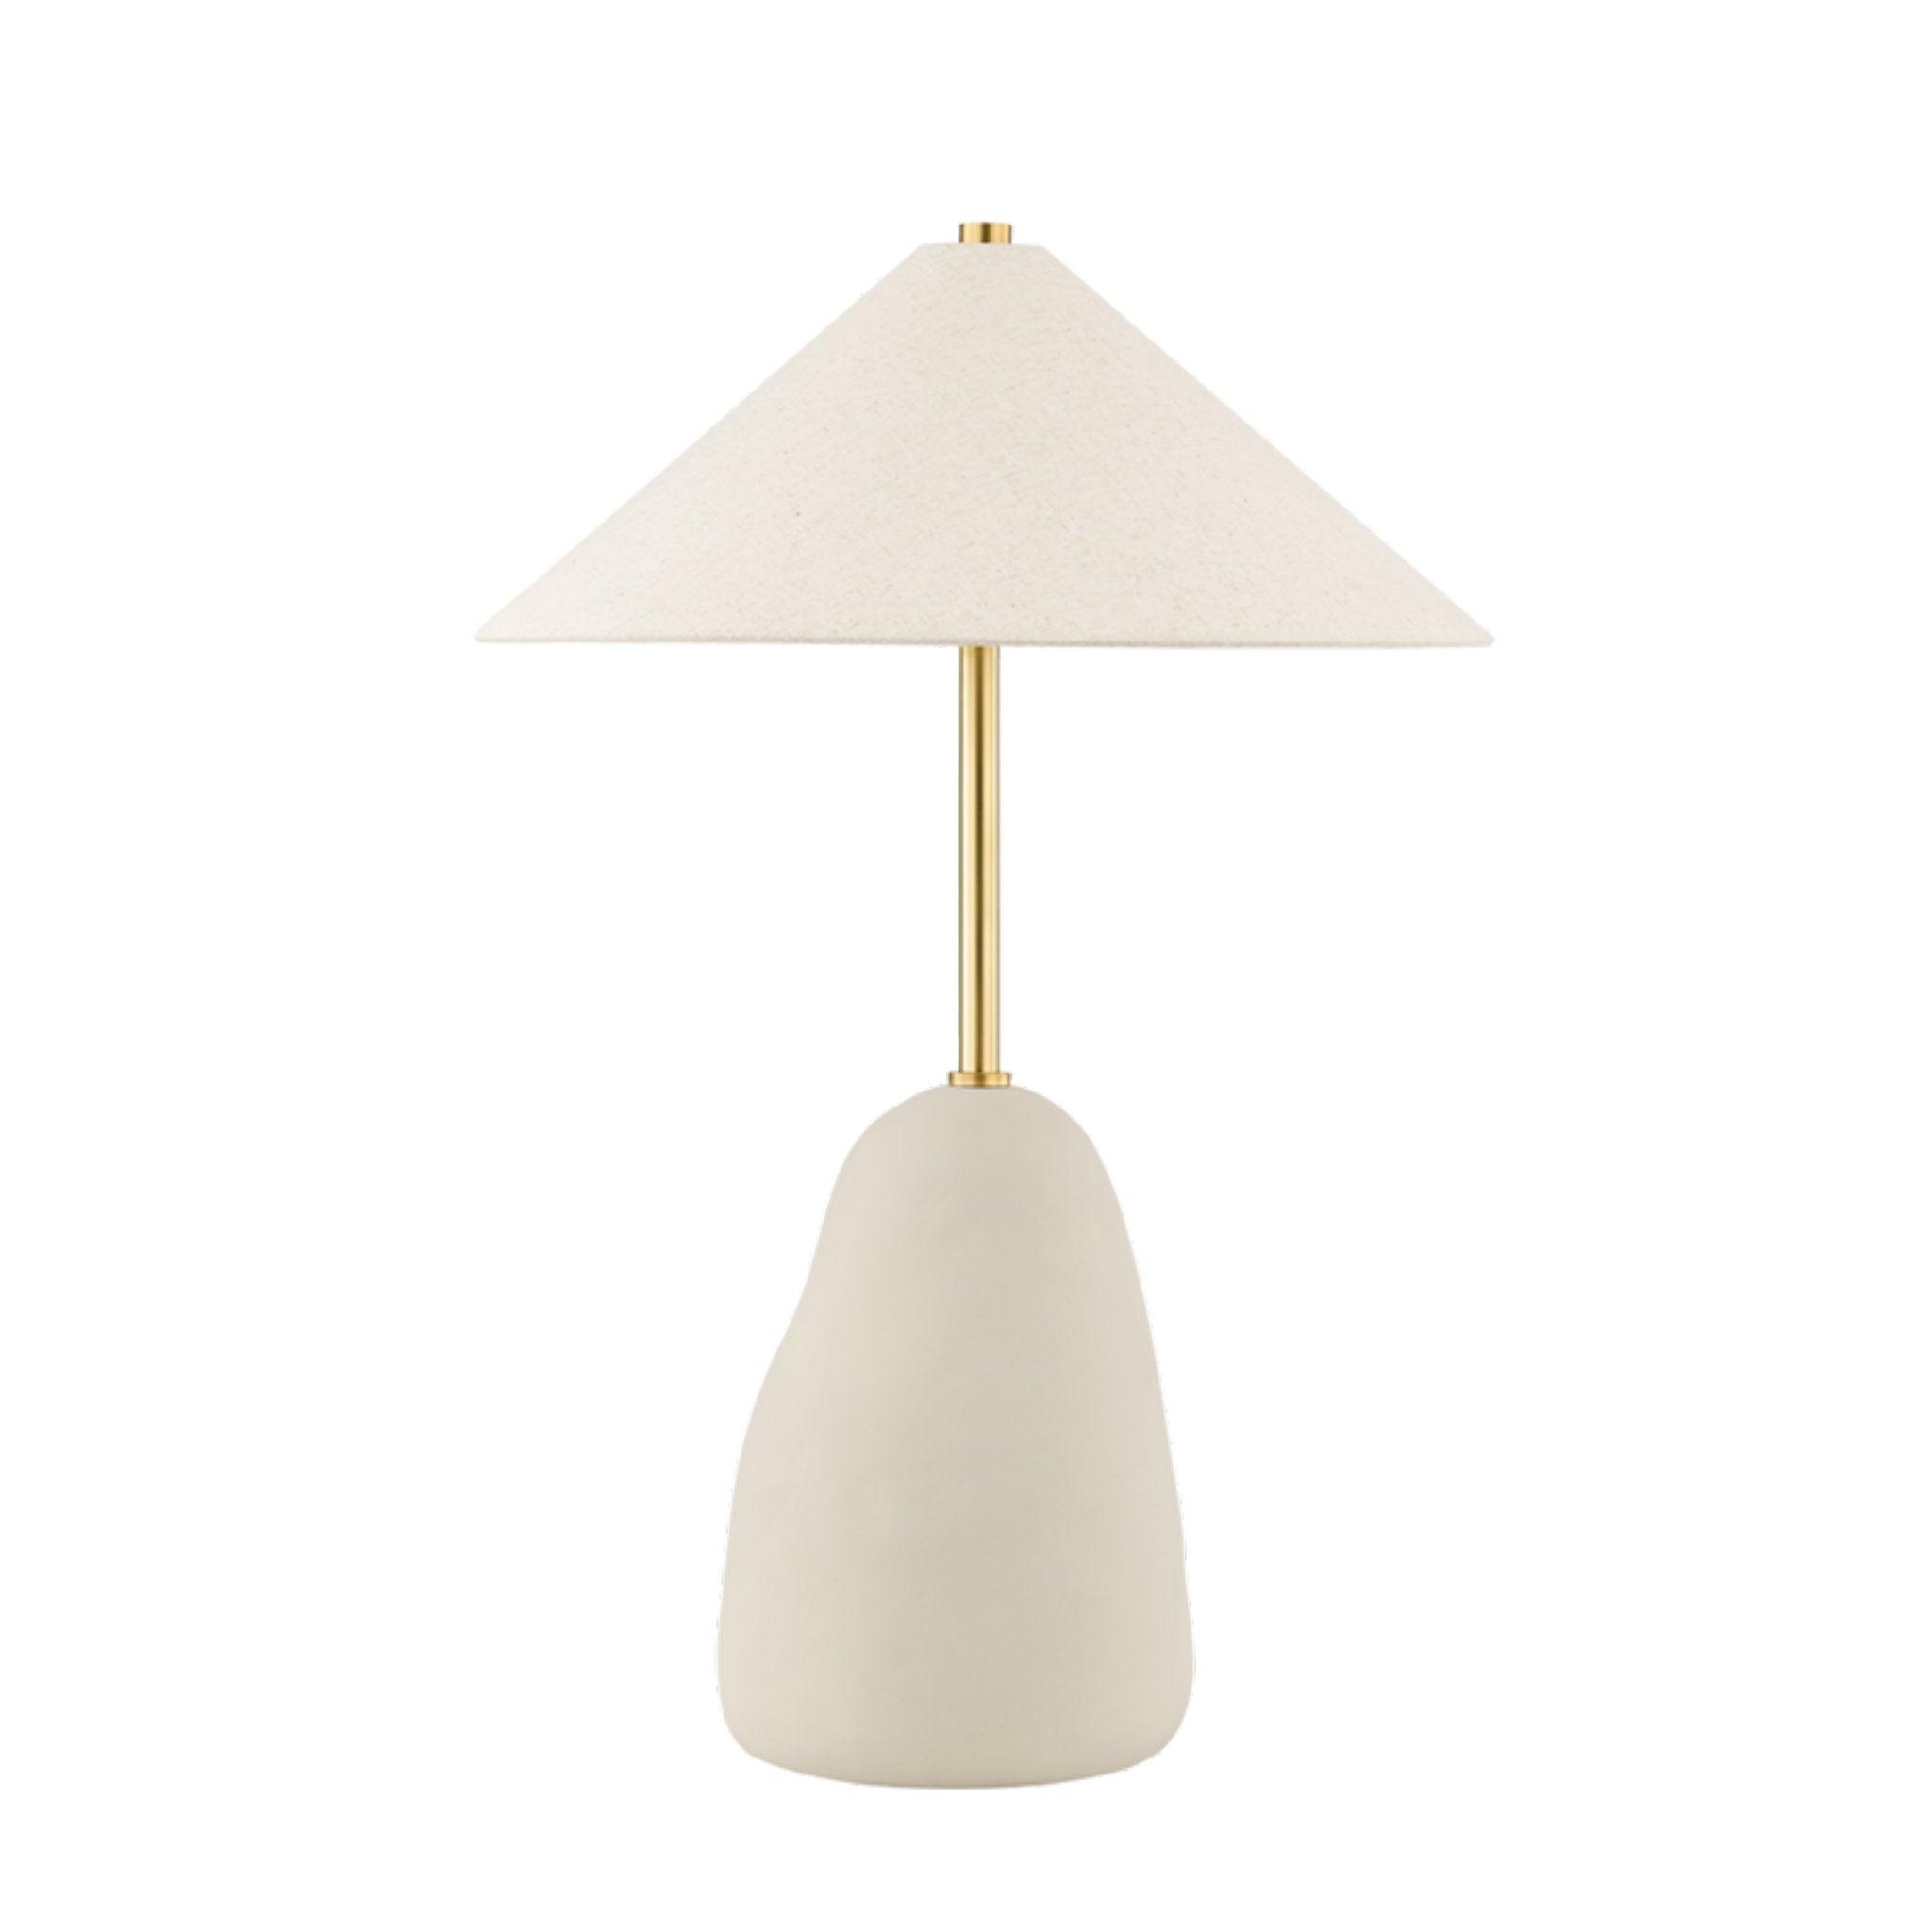 Maia 2-Light Table Lamp in Aged Brass/Ceramic Textured Beige by Eny Lee Parker